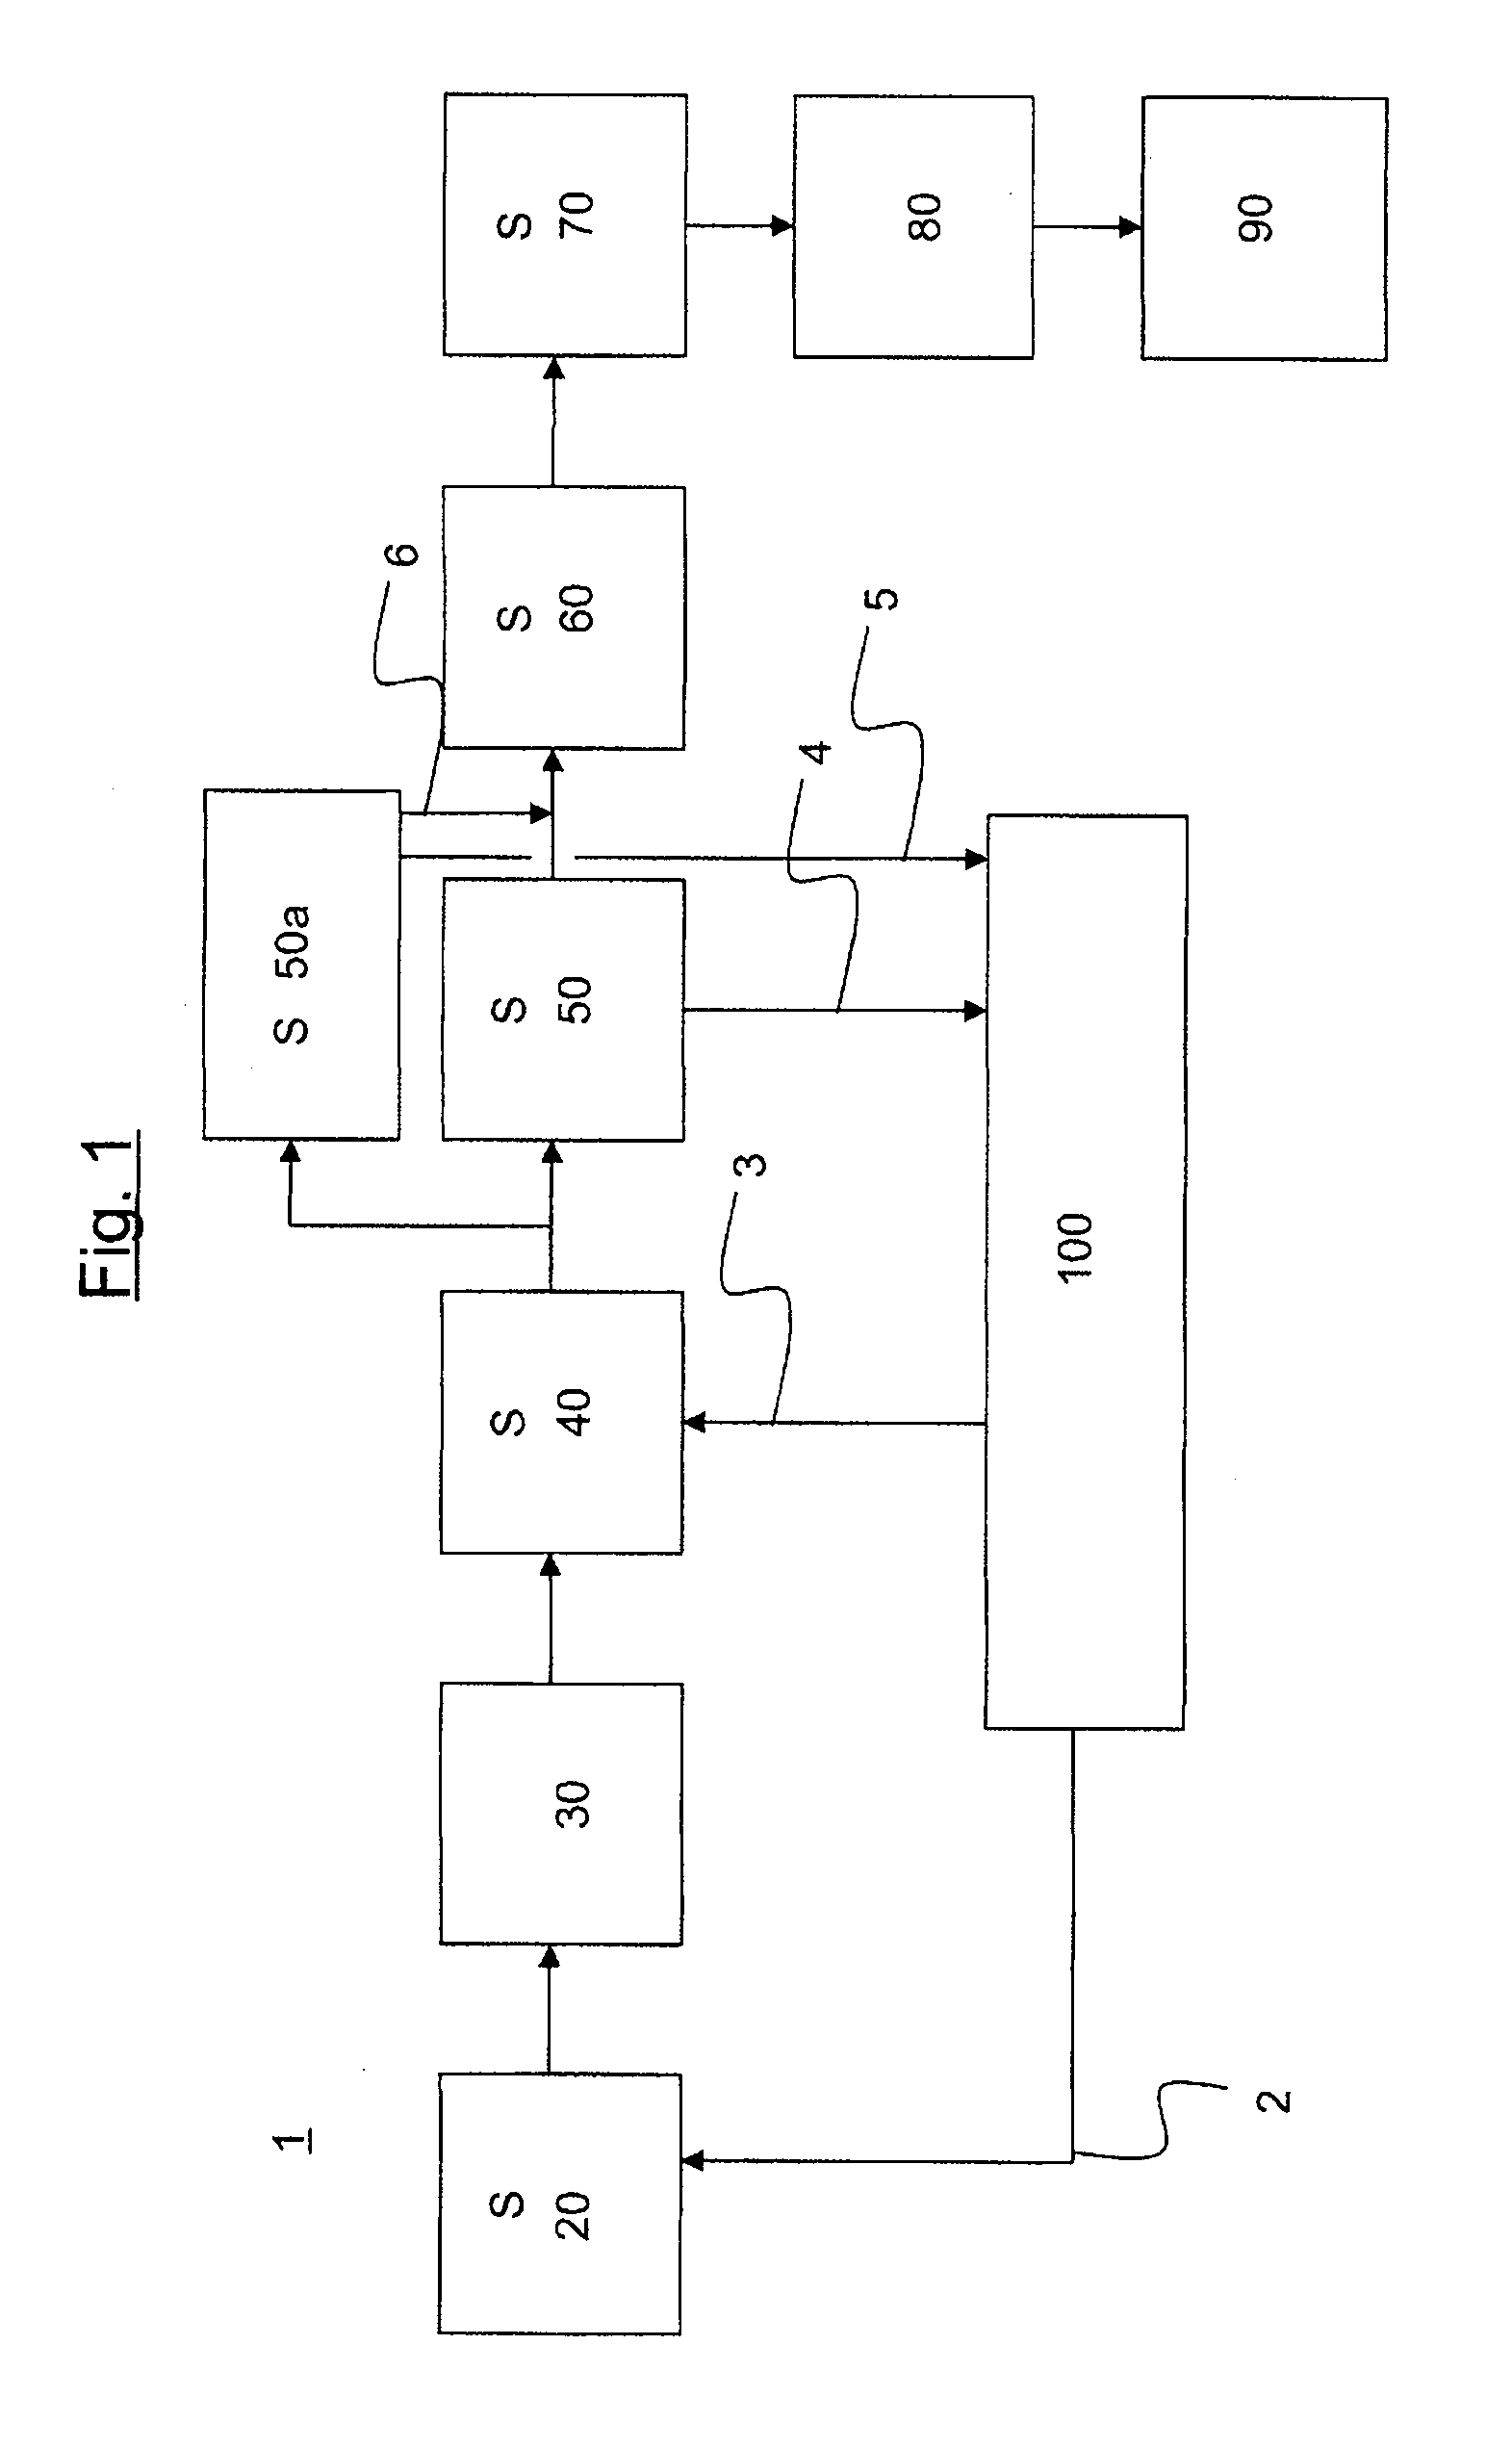 Process for preparing cyanohydrins and their use in the preparation of alkyl esters of methacrylic acid